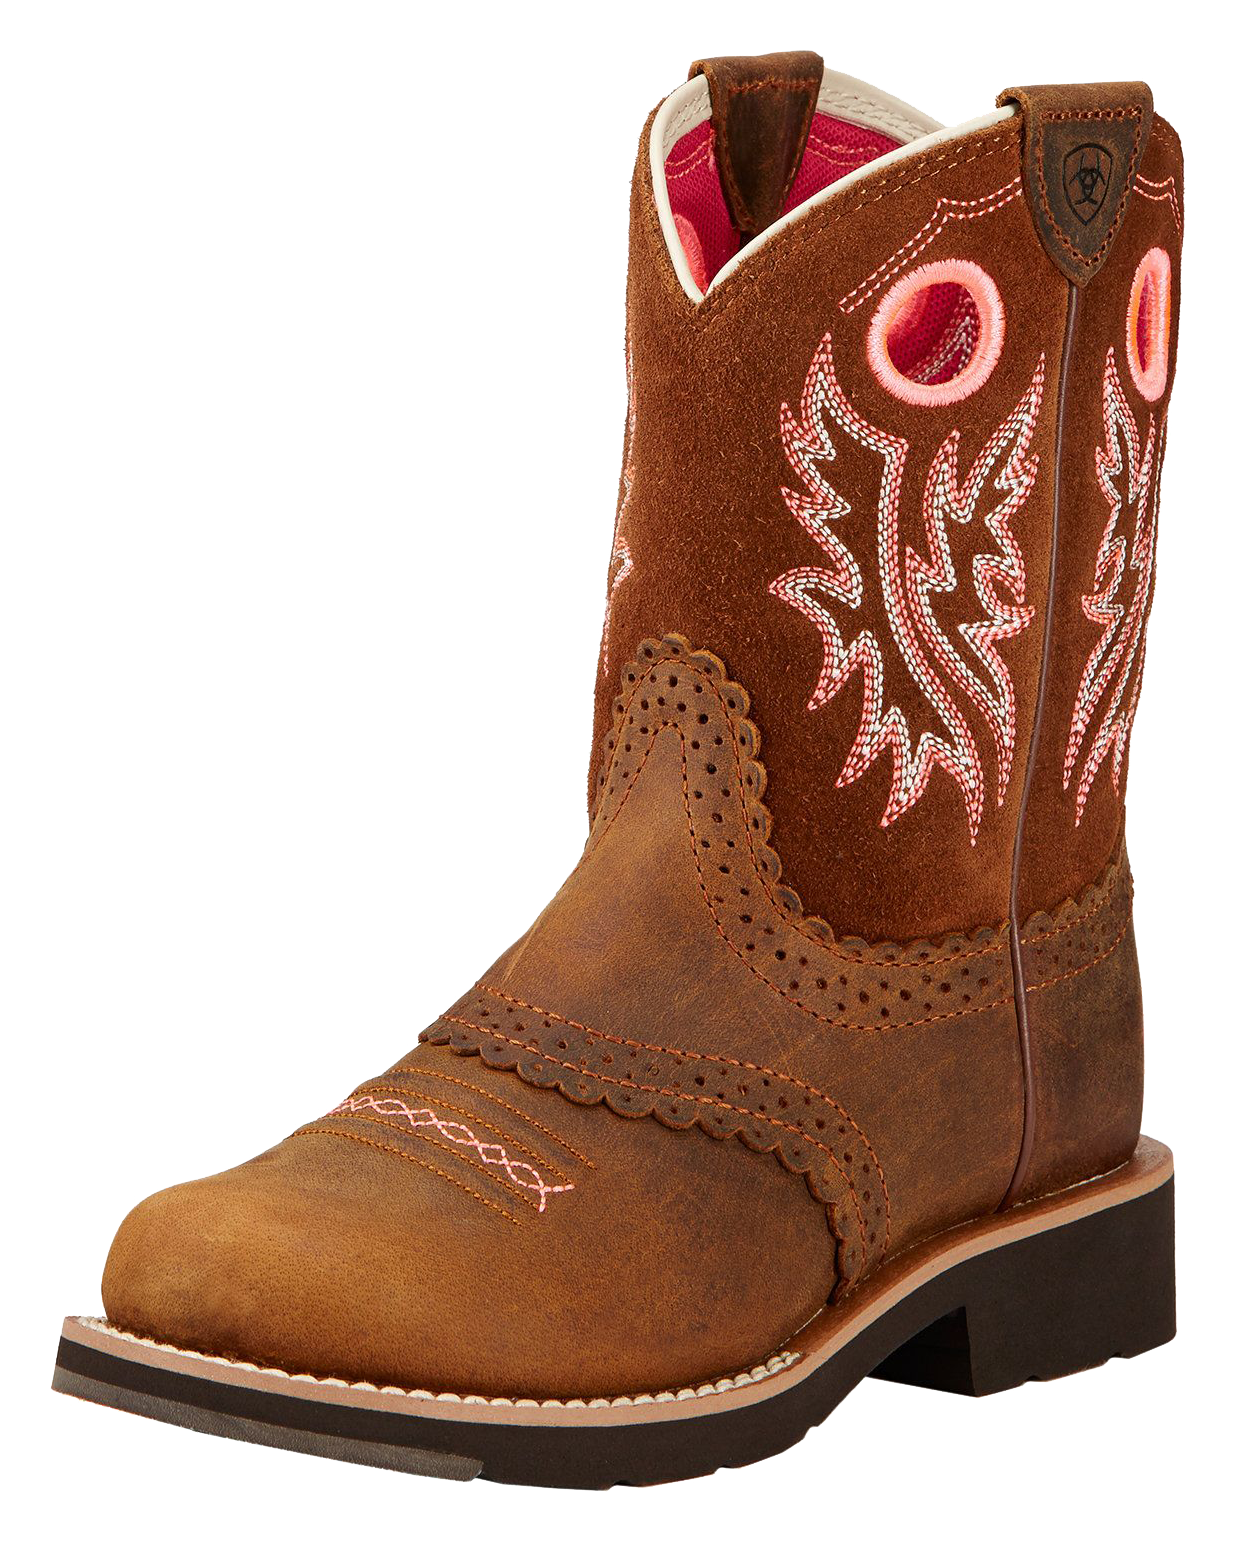 Ariat Fatbaby Cowgirl Western Boots for Kids - Powder Brown - 11.5 Kids